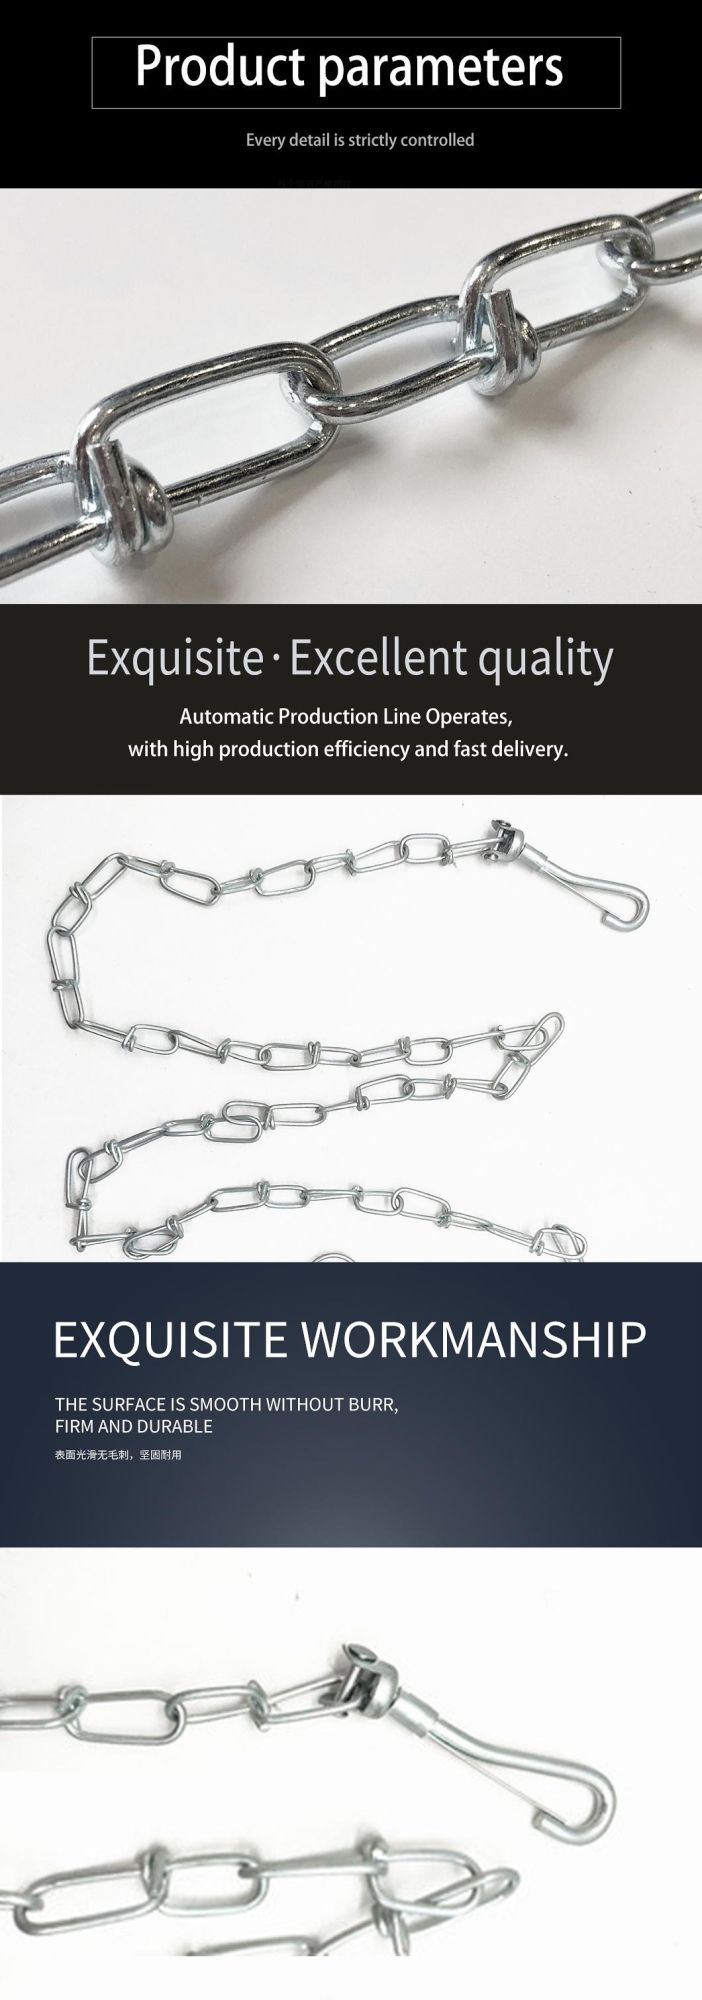 German Standard Long Link Twisted Tie out Chain by Qingdaofactory